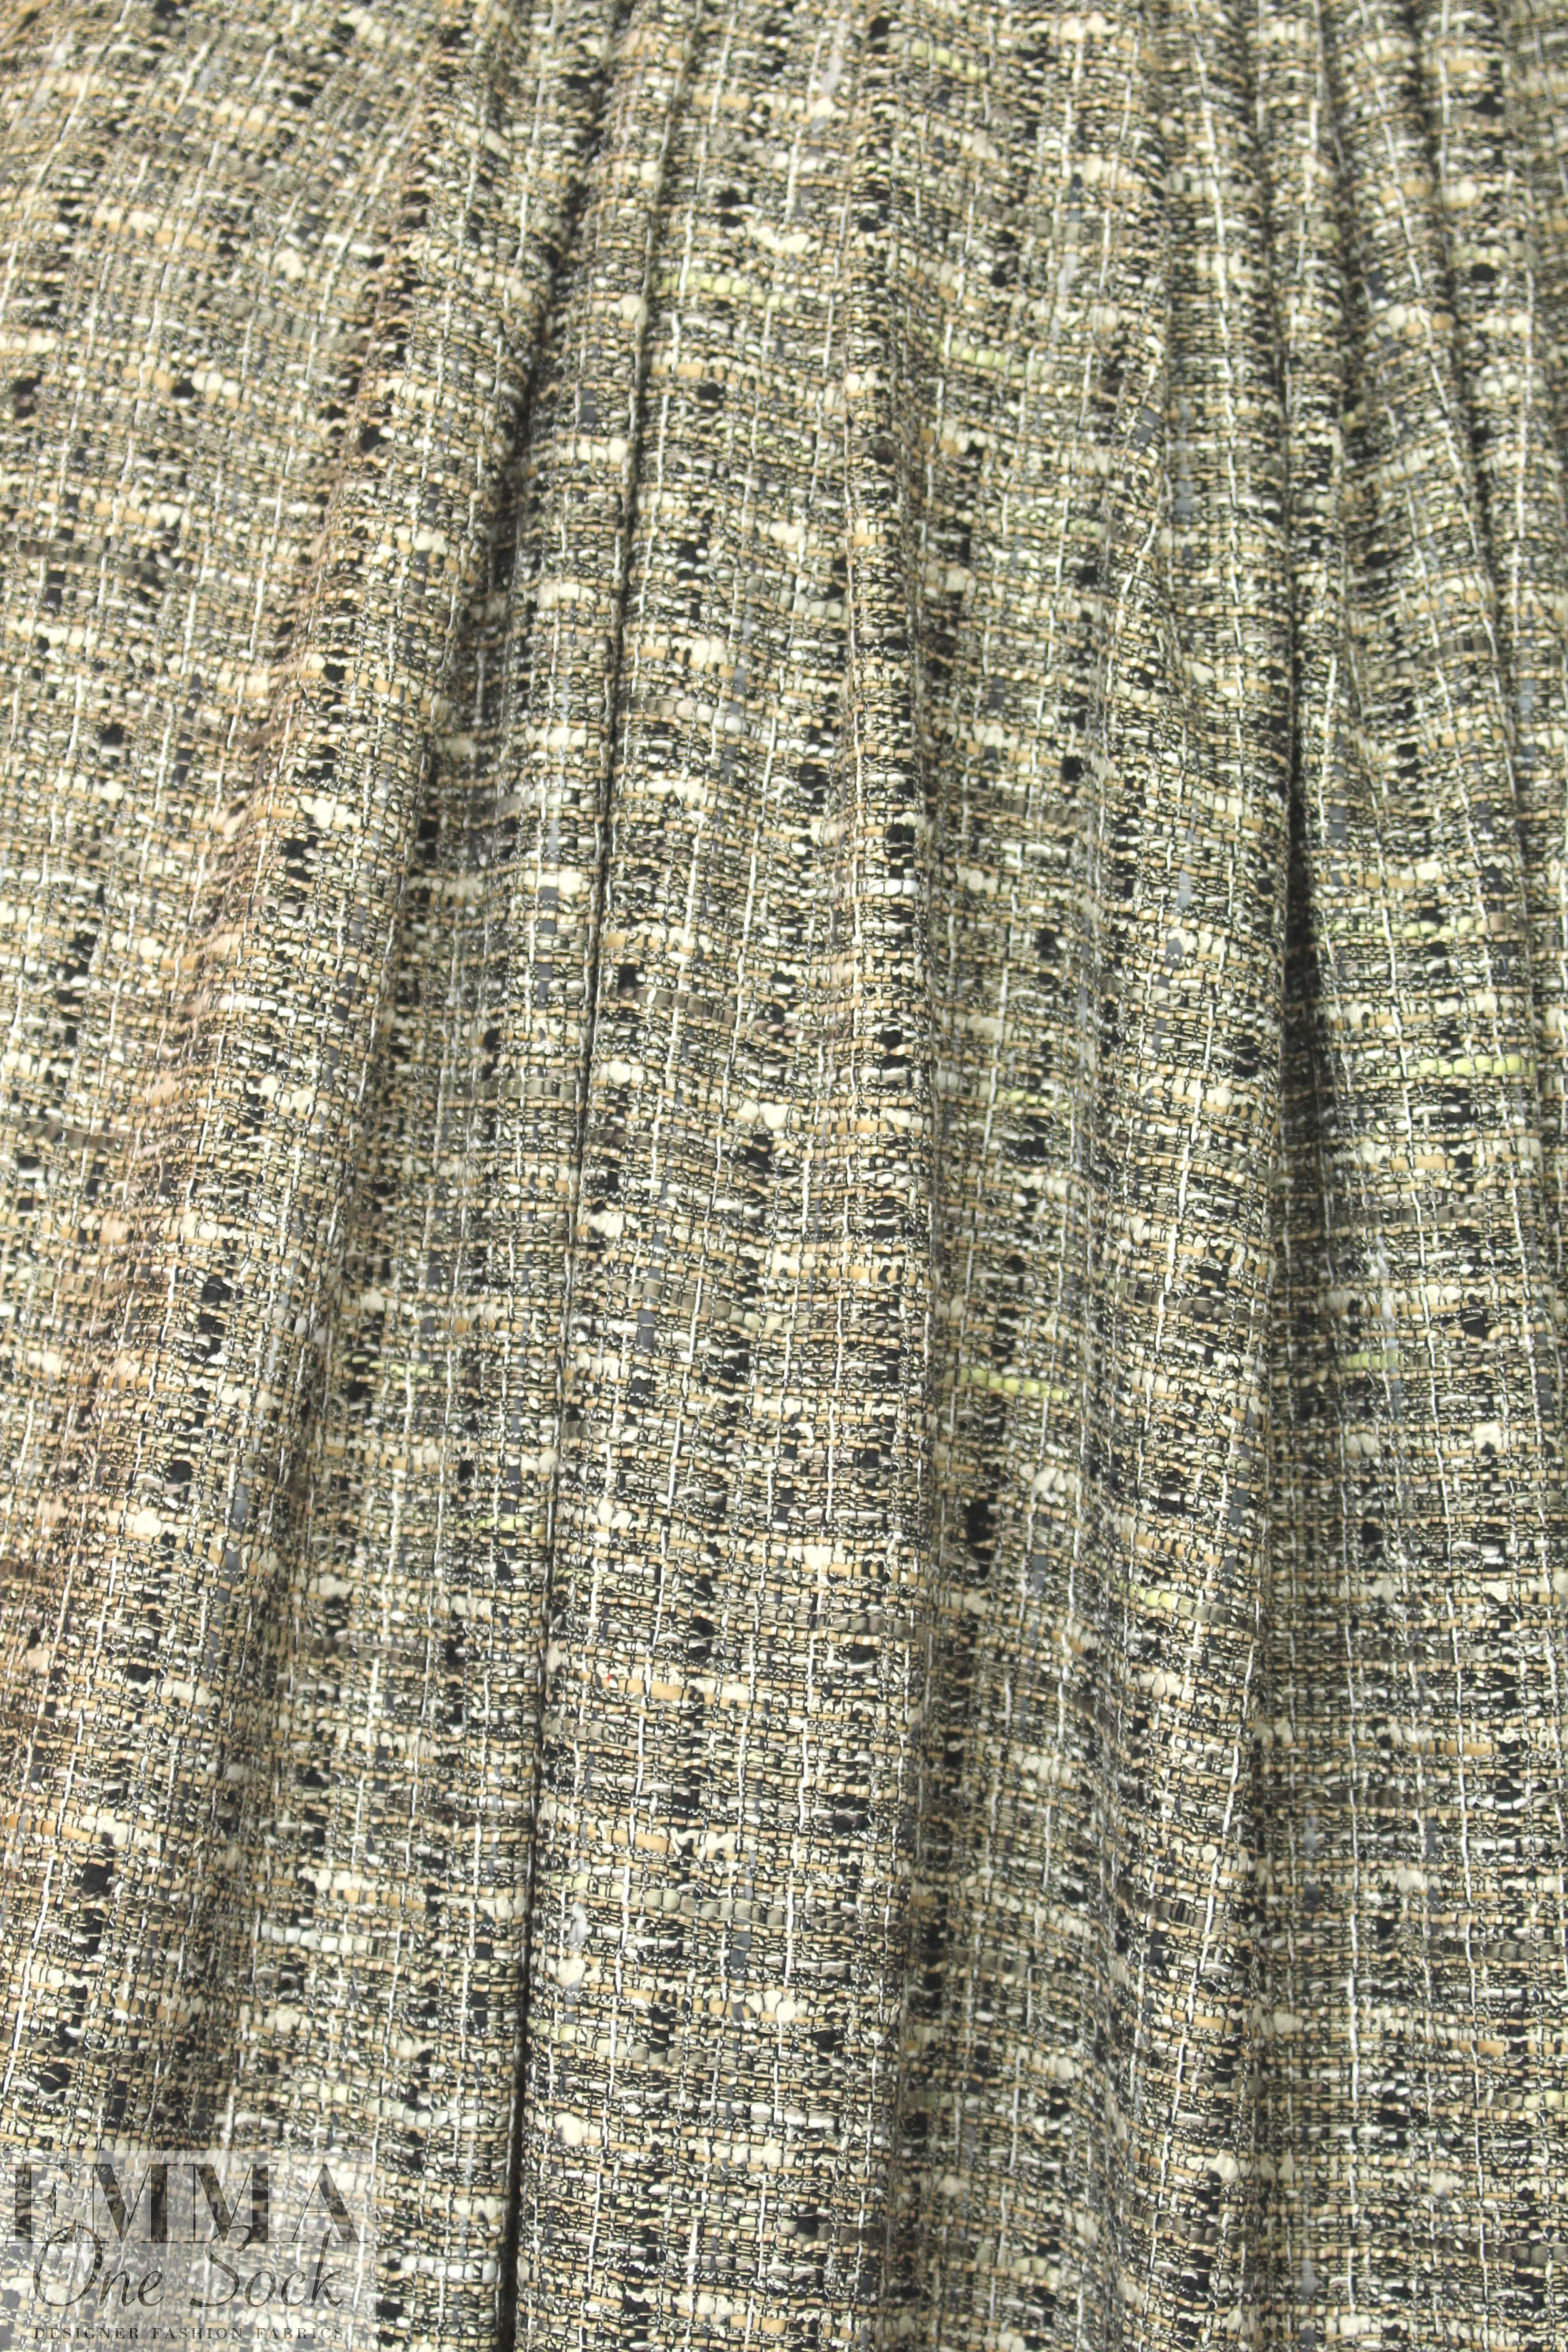 Italian 'Chanel tweed' cotton boucle' - taupe/black from